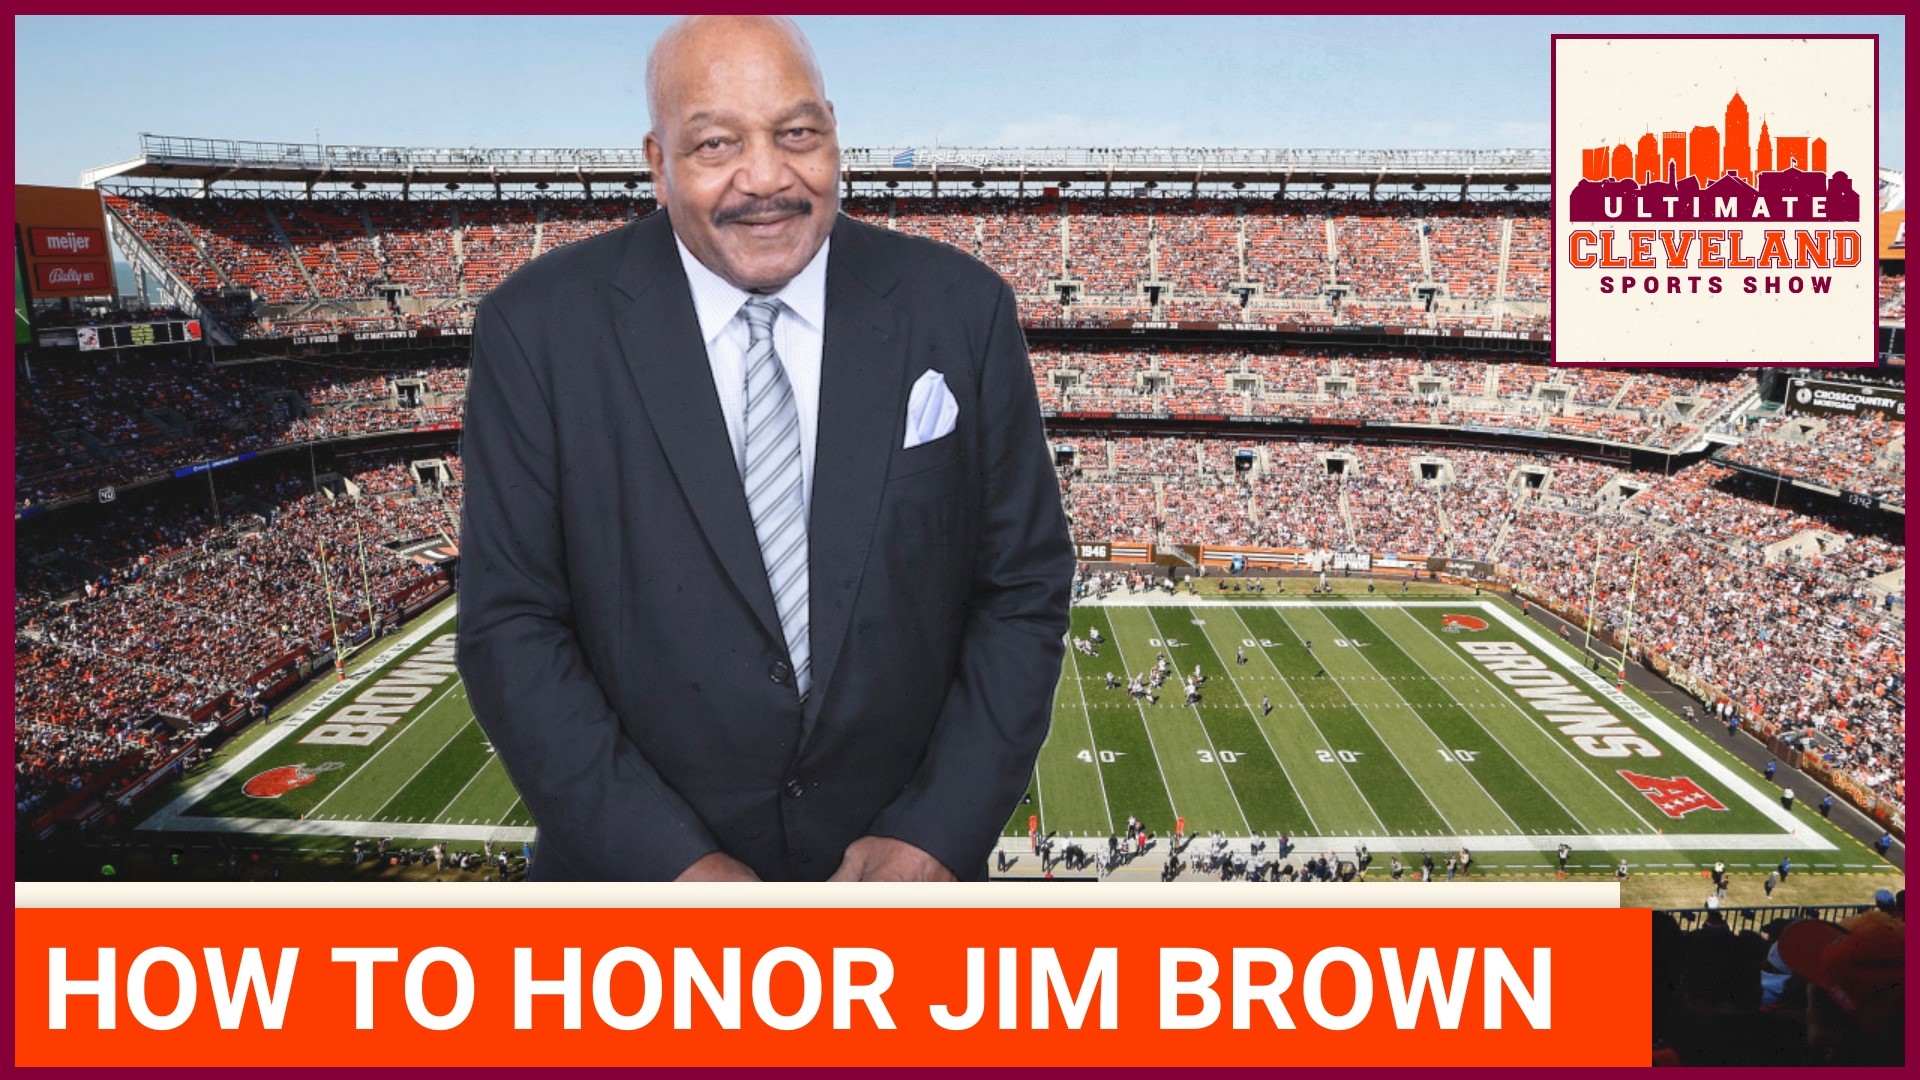 The UCSS panel pitches ideas on how to honor Jim Brown. Should the Cleveland Browns put a 32 decal on their helmets, put a 32 on the middle of the field or...